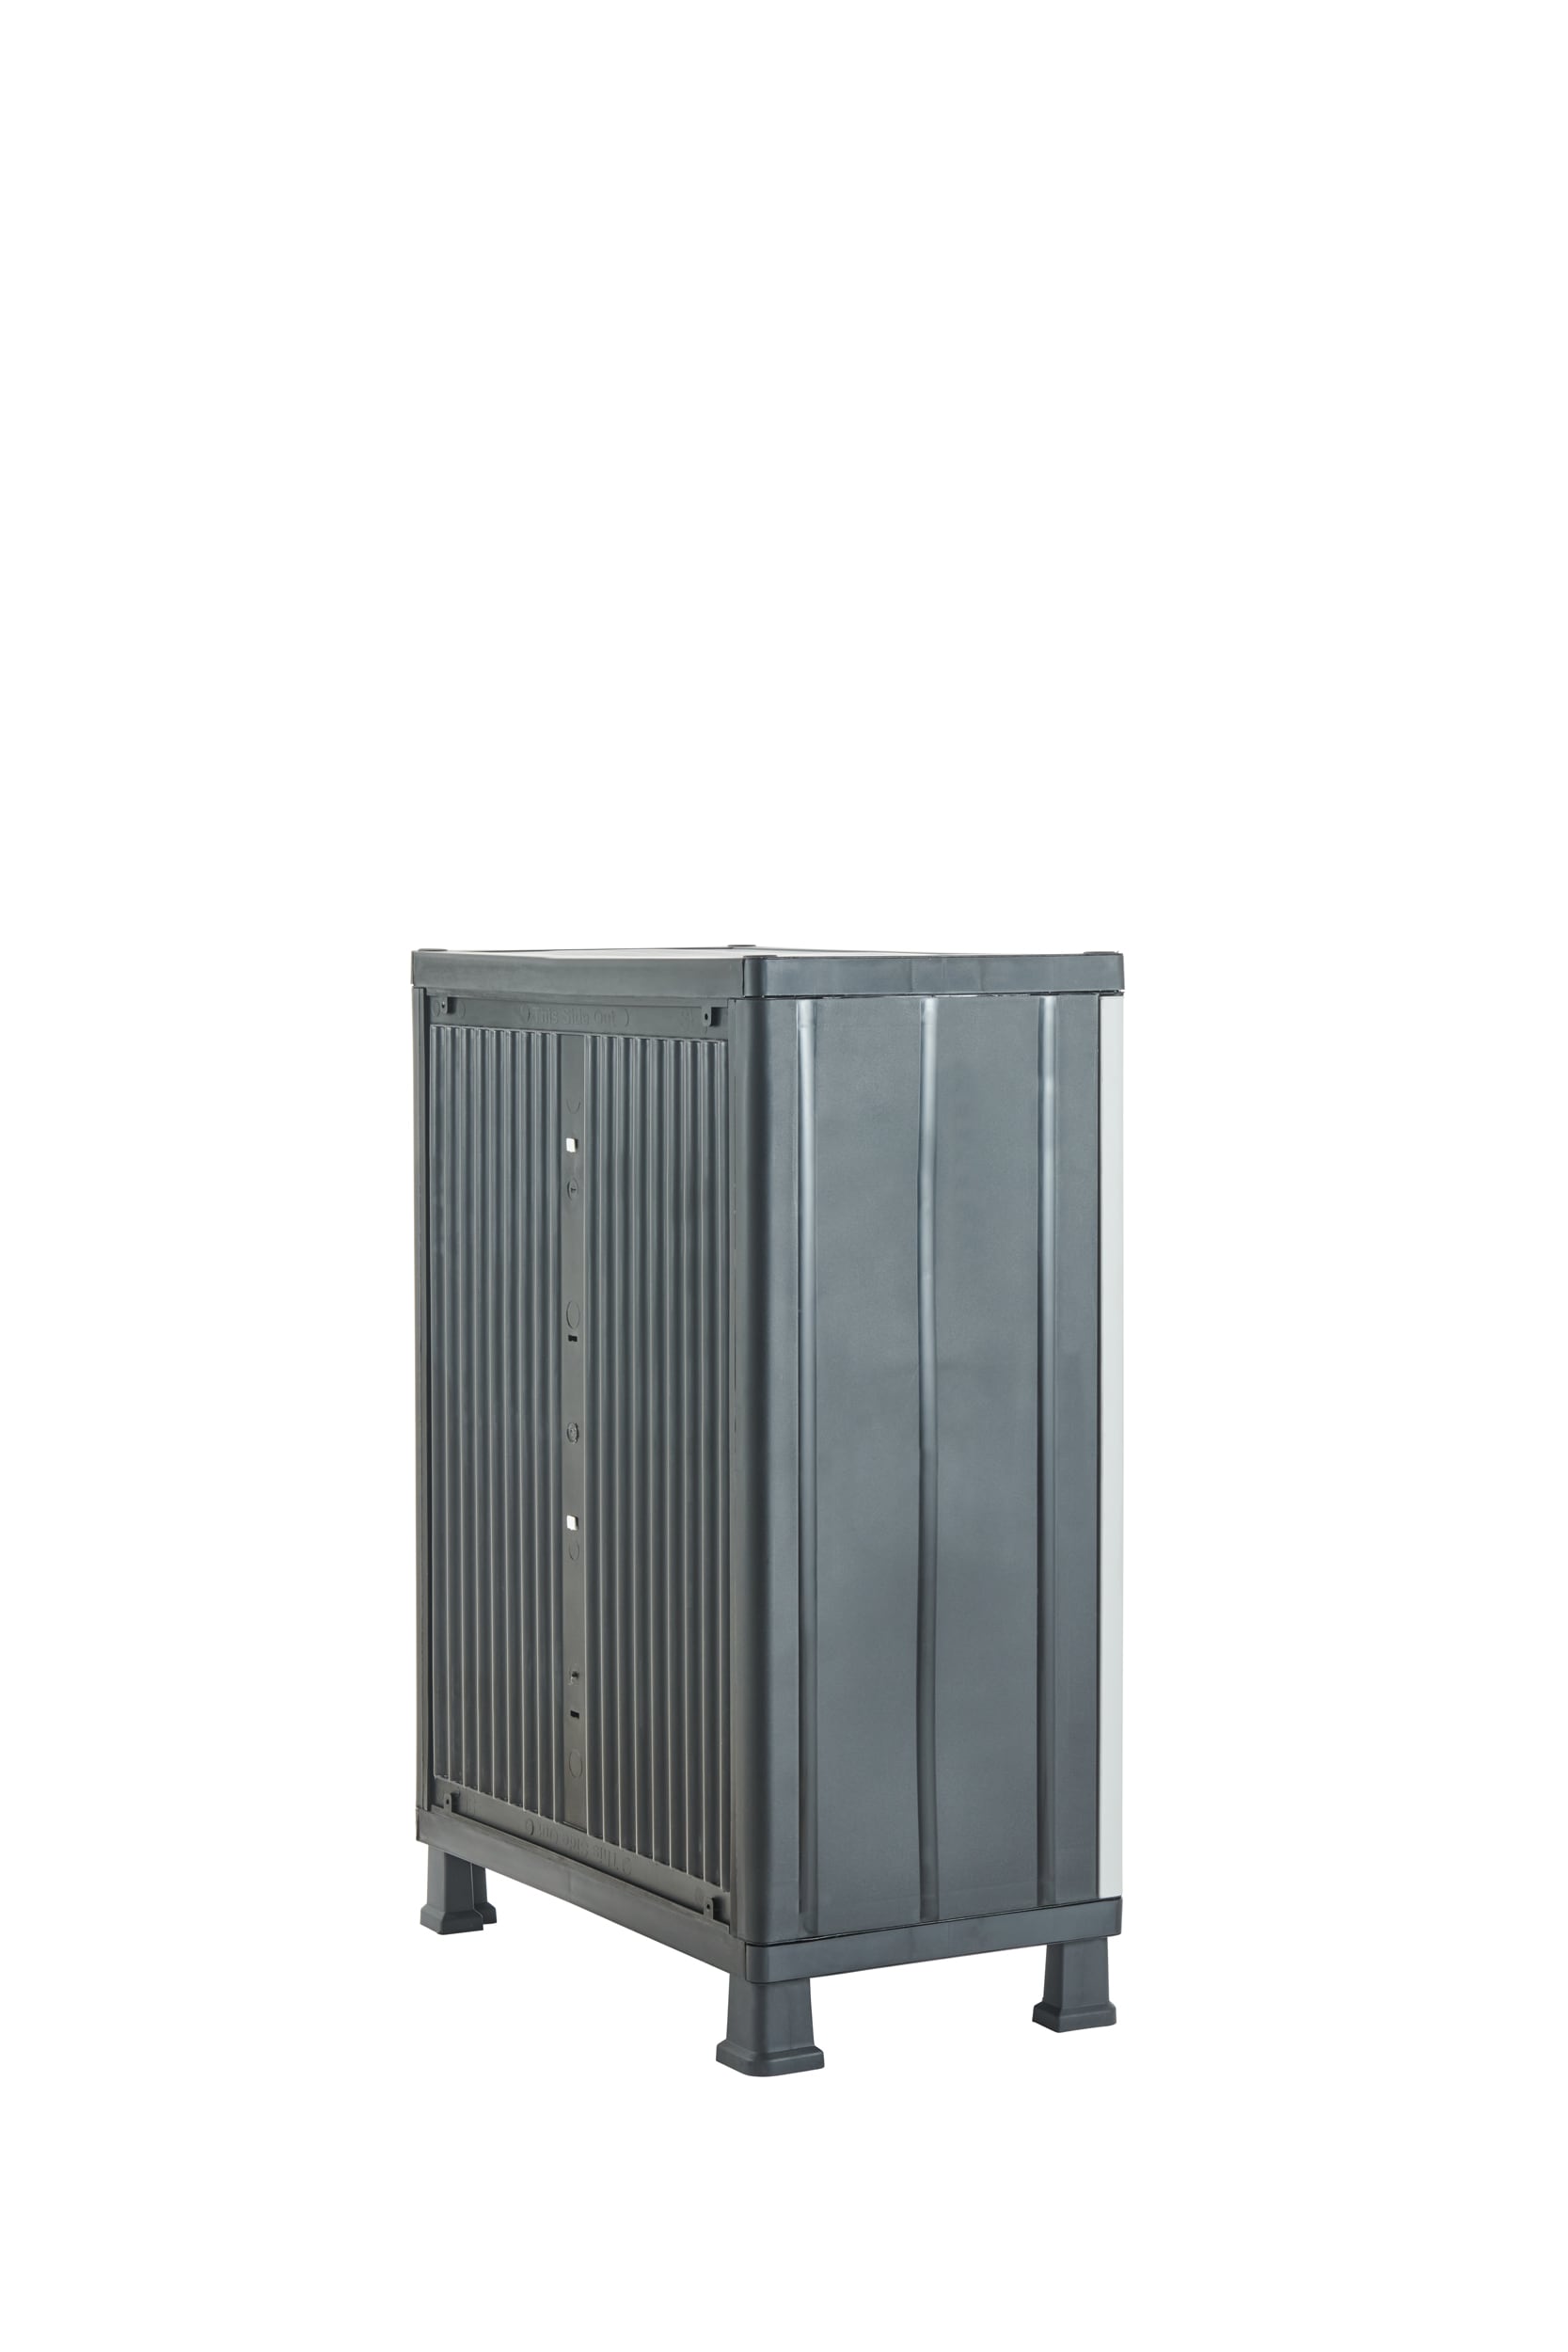 Details about   Keter Low Cabinet For StorageGrey 